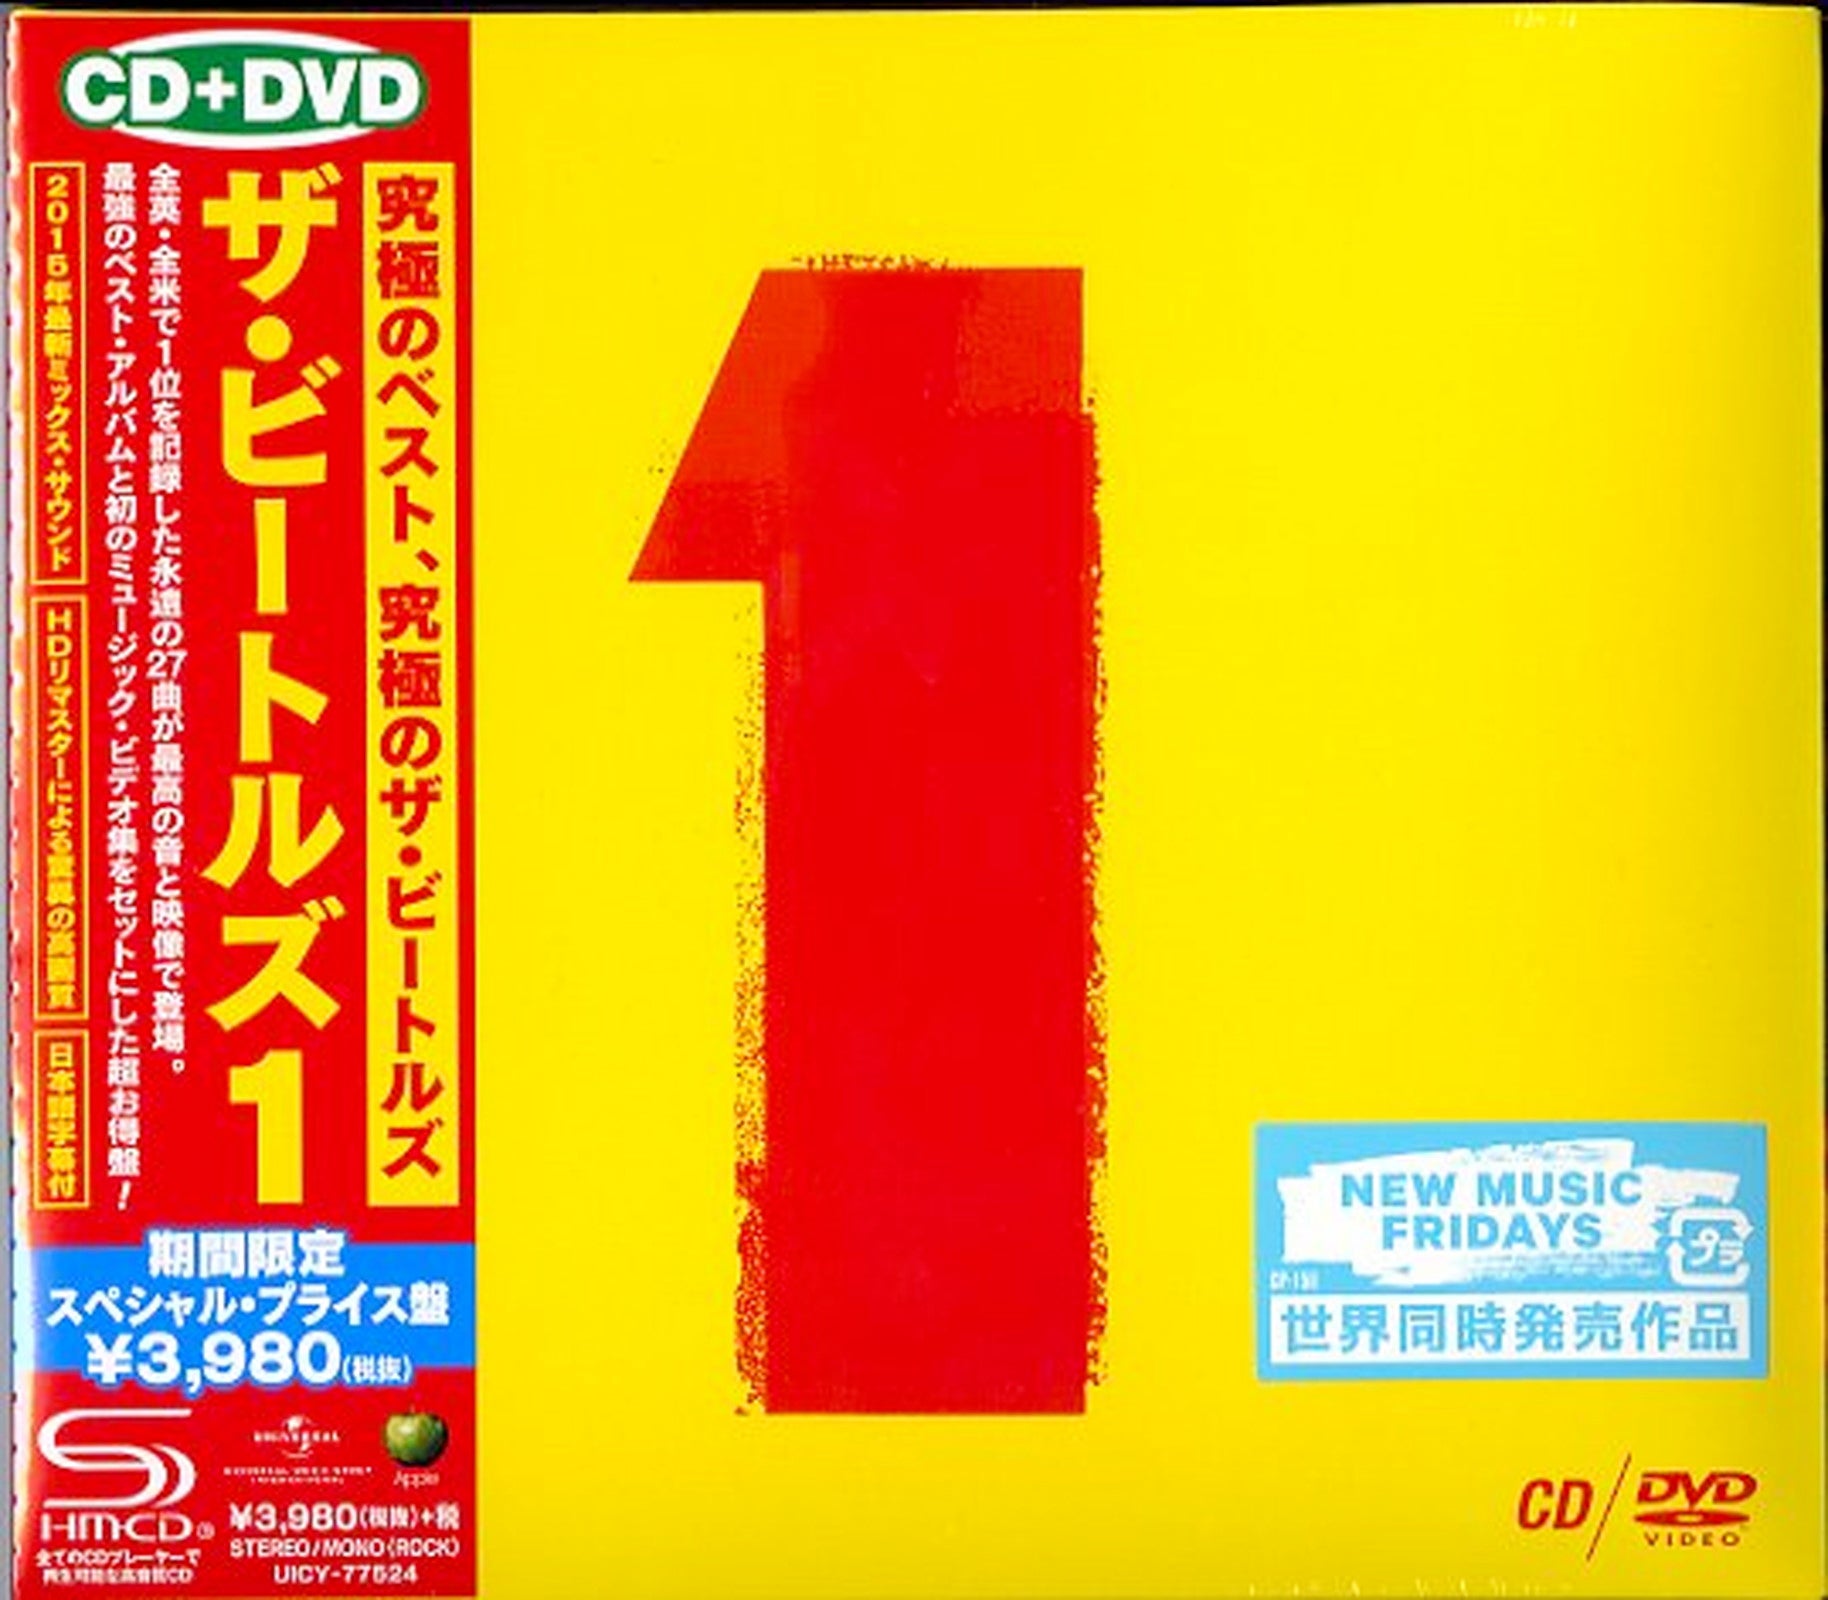 The Beatles - The Beatles 1 - Japan SHM-CD+DVD Limited Edition